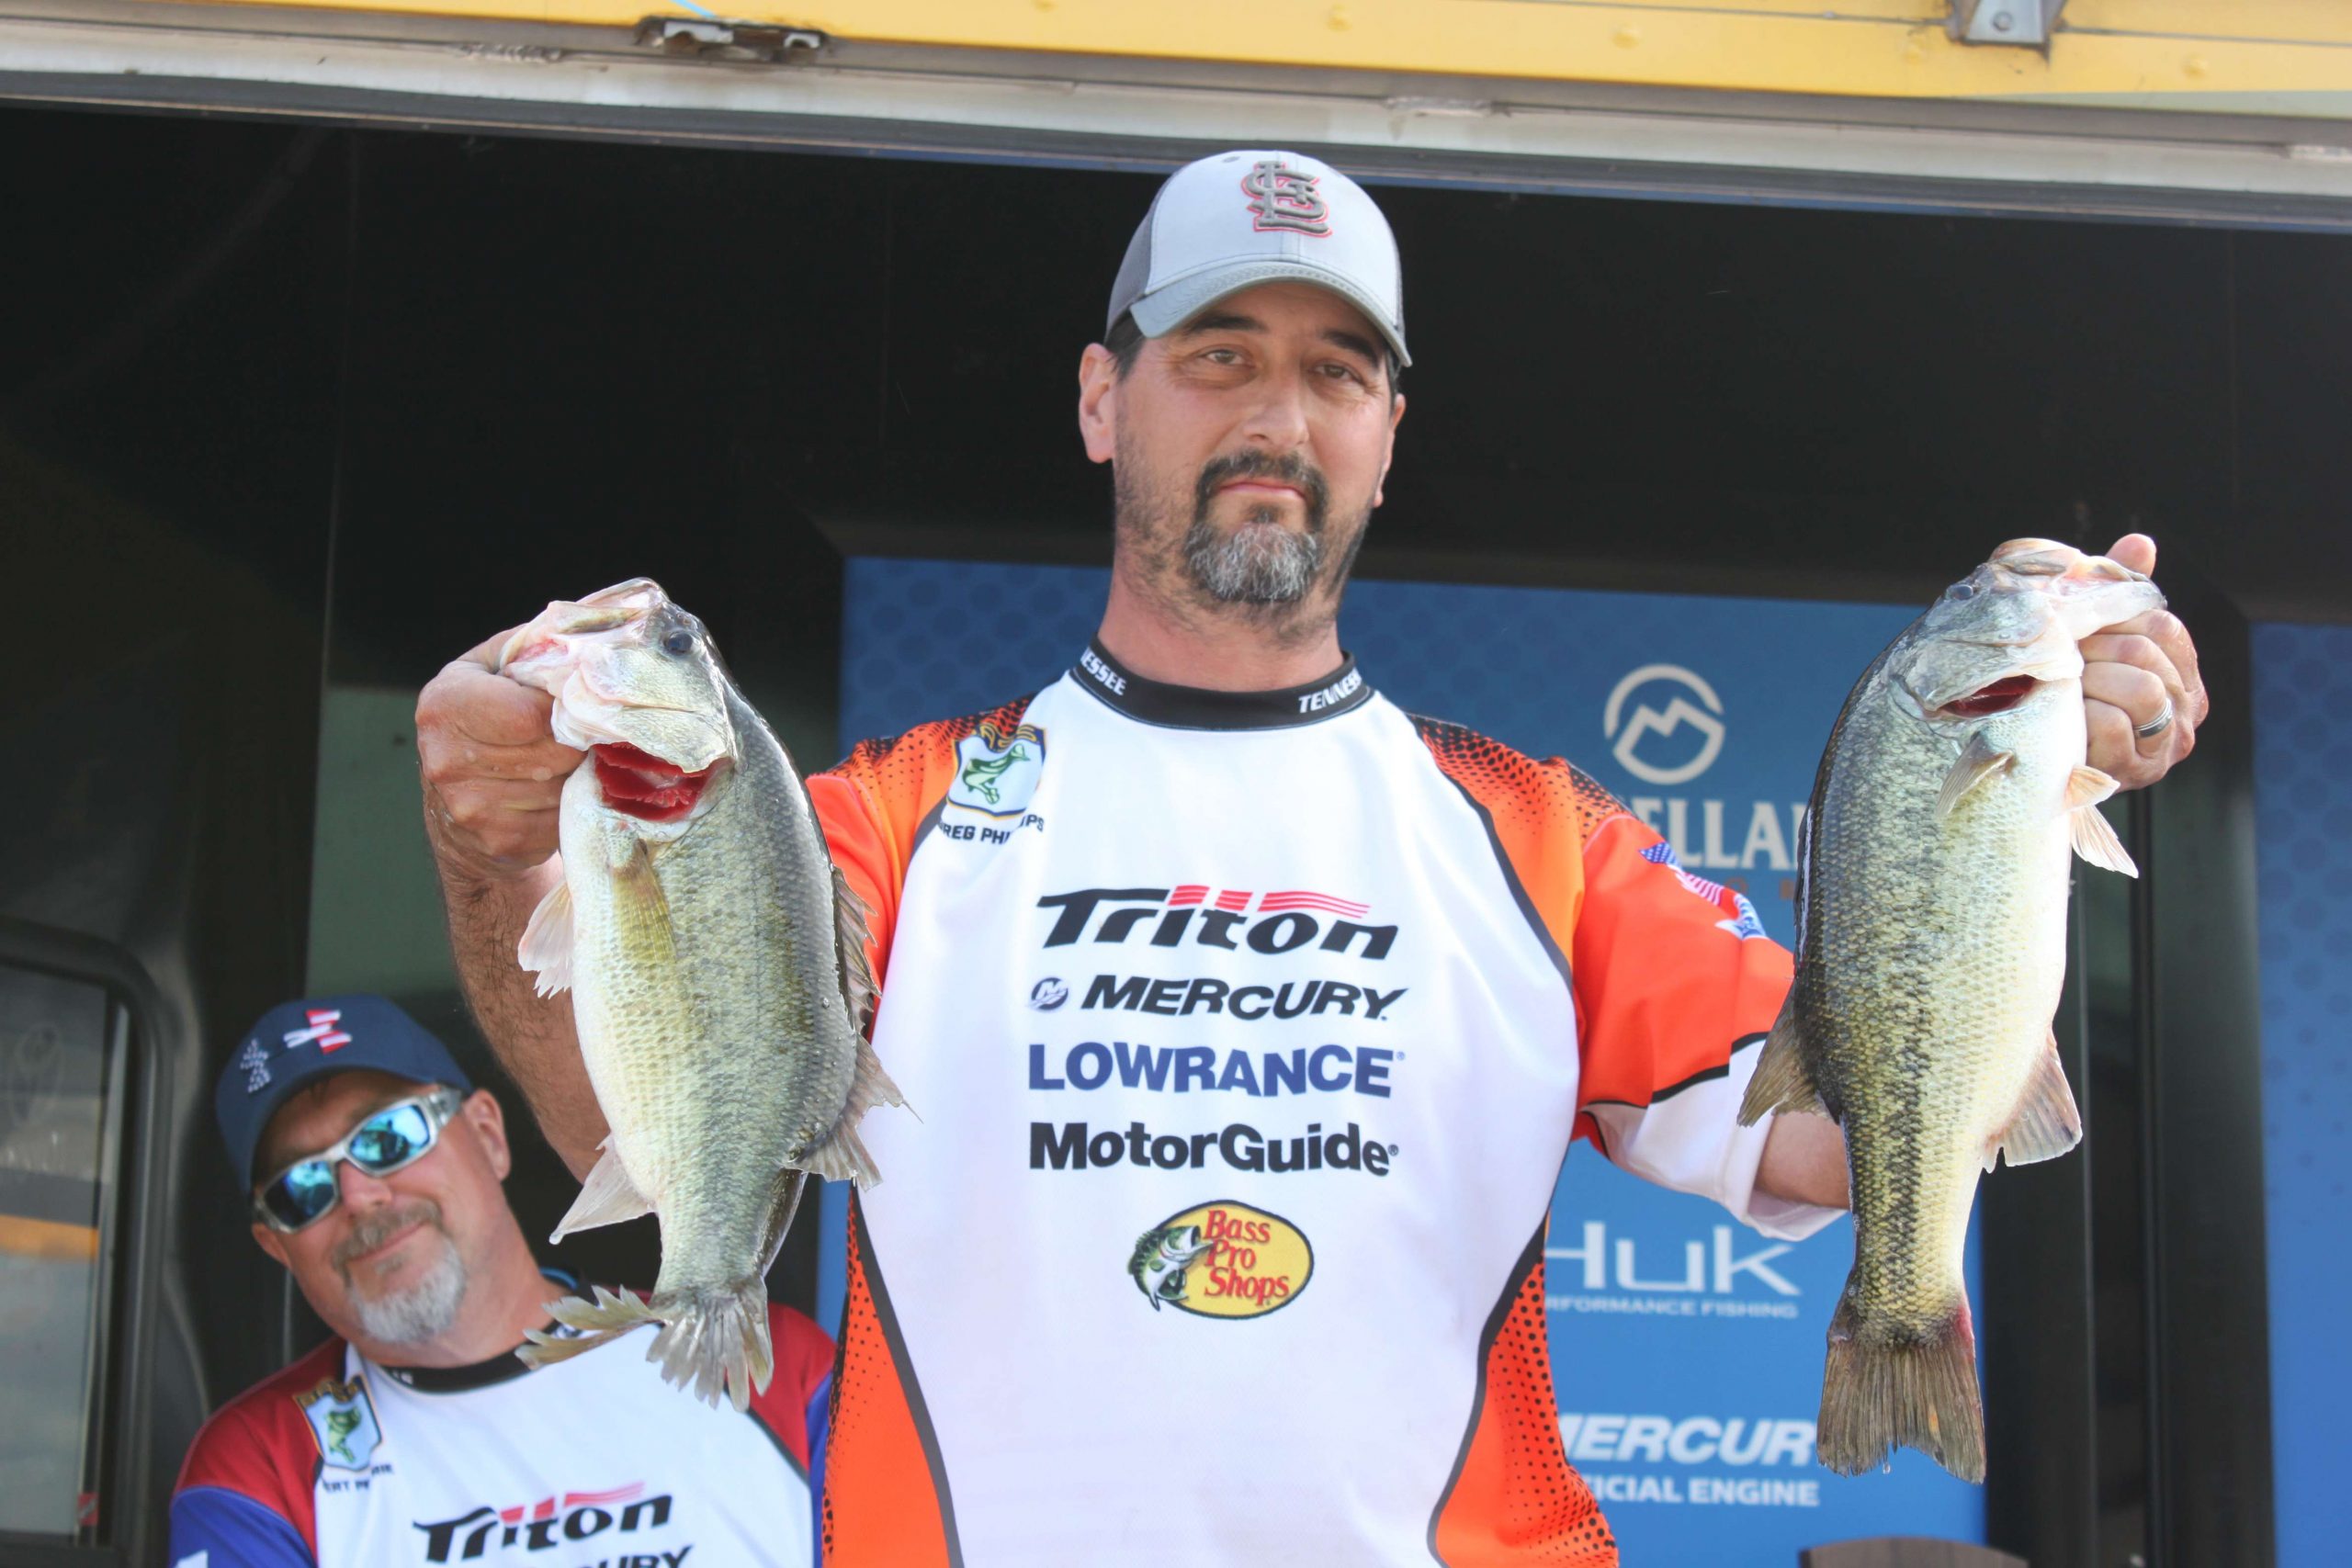 Greg Phillips of Tennessee finished 12th in the boater division with 45-11 over three days.